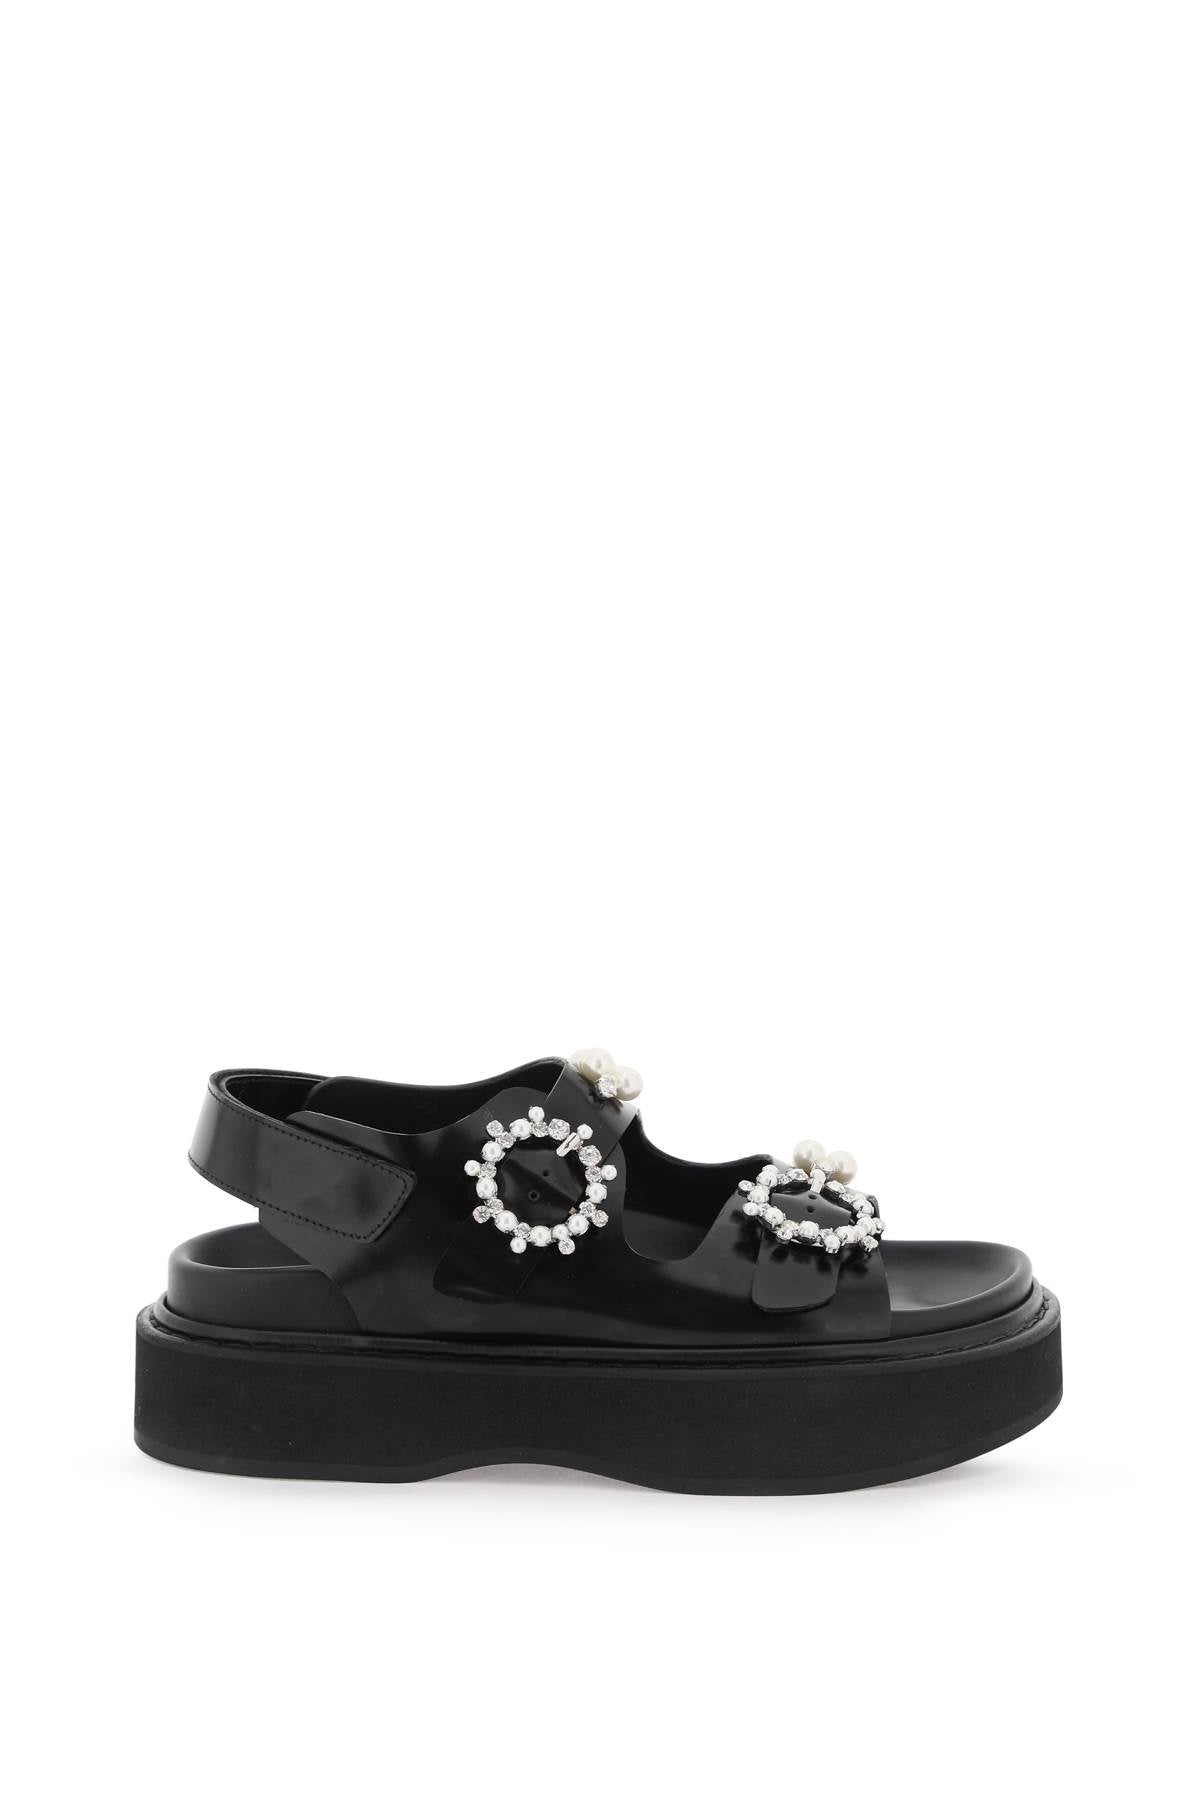 Simone Rocha Platform Sandals With Pearls And Crystals In Black